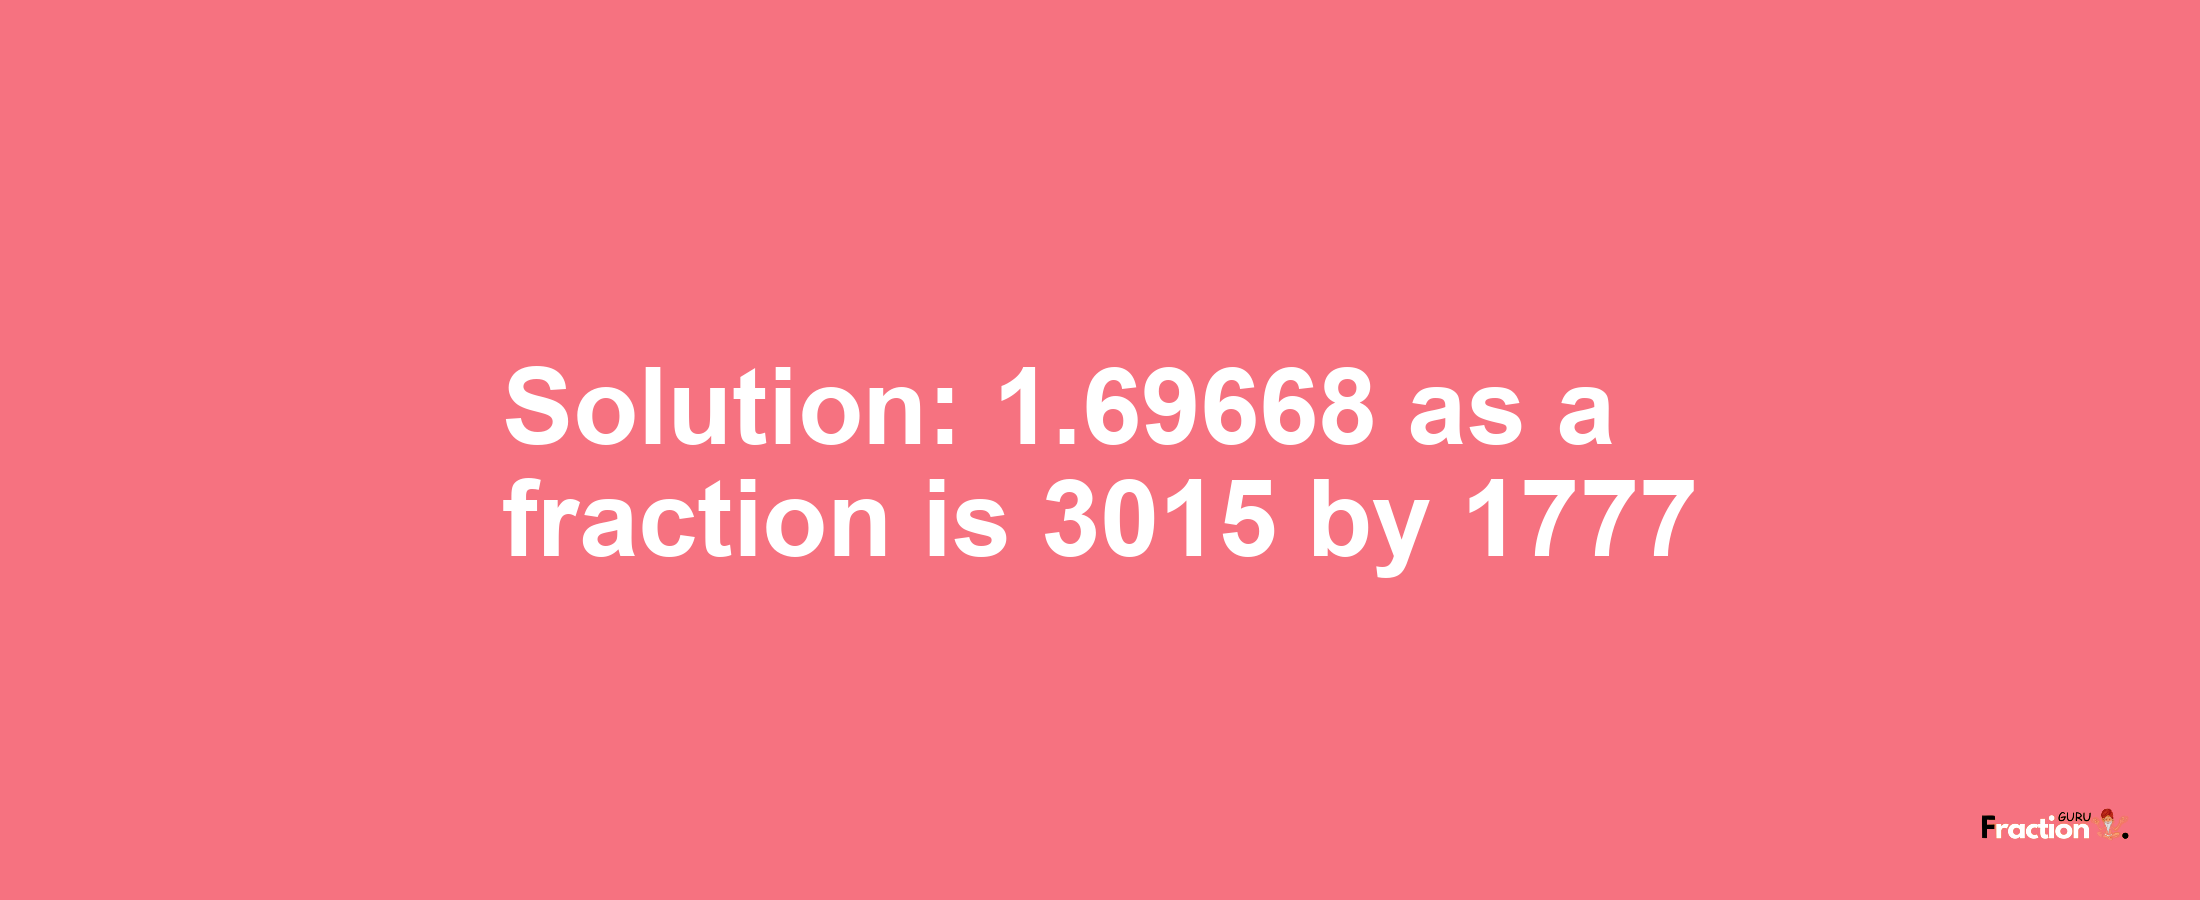 Solution:1.69668 as a fraction is 3015/1777